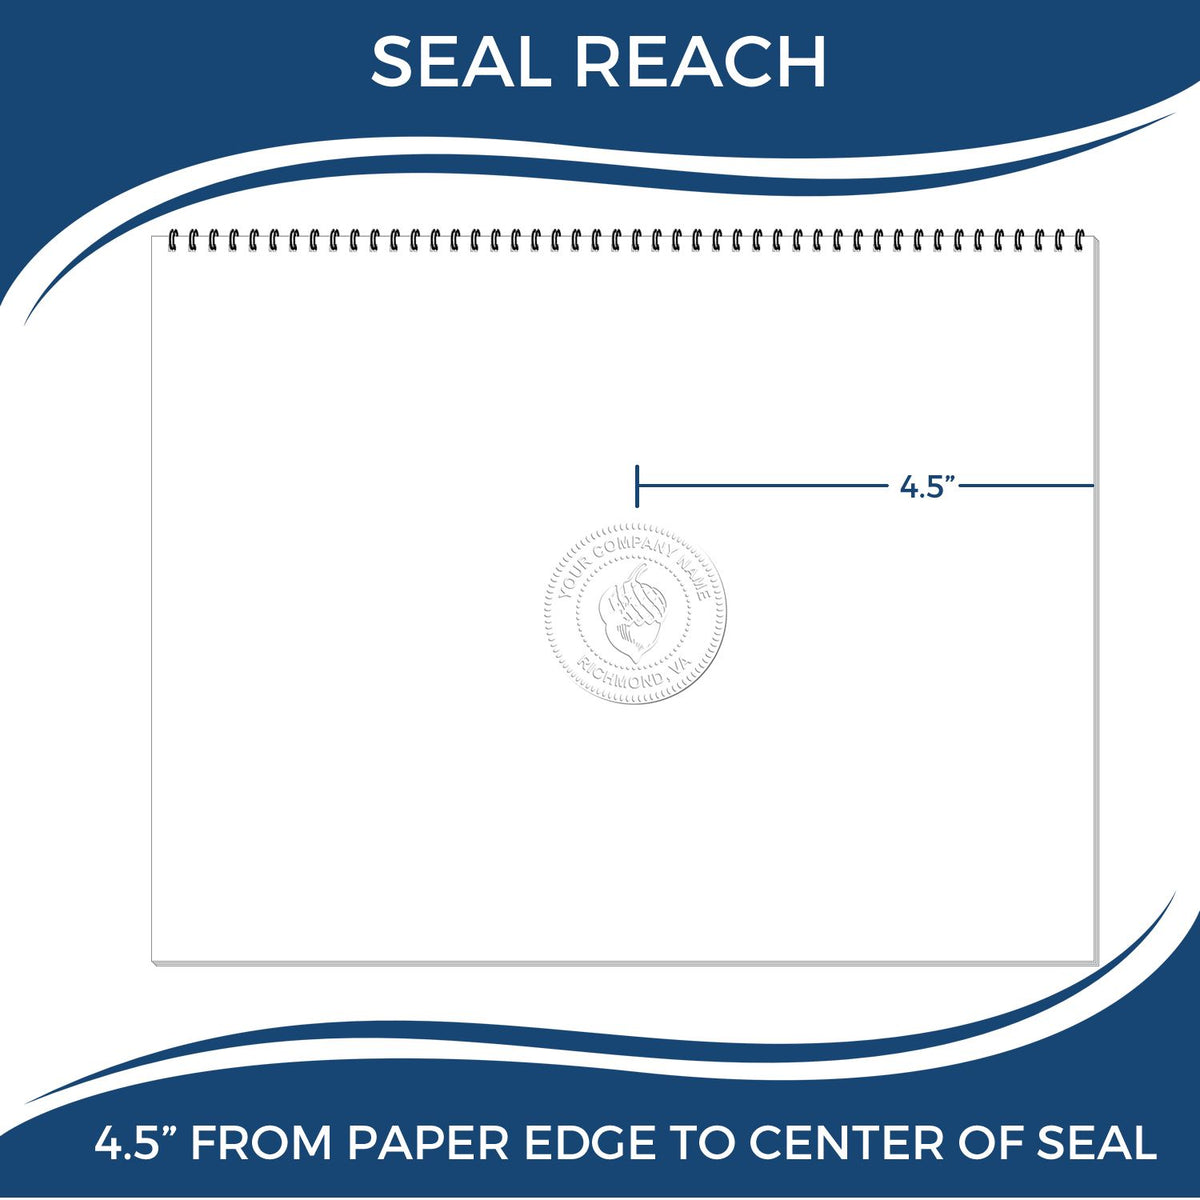 An infographic showing the seal reach which is represented by a ruler and a miniature seal image of the State of North Carolina Extended Long Reach Engineer Seal